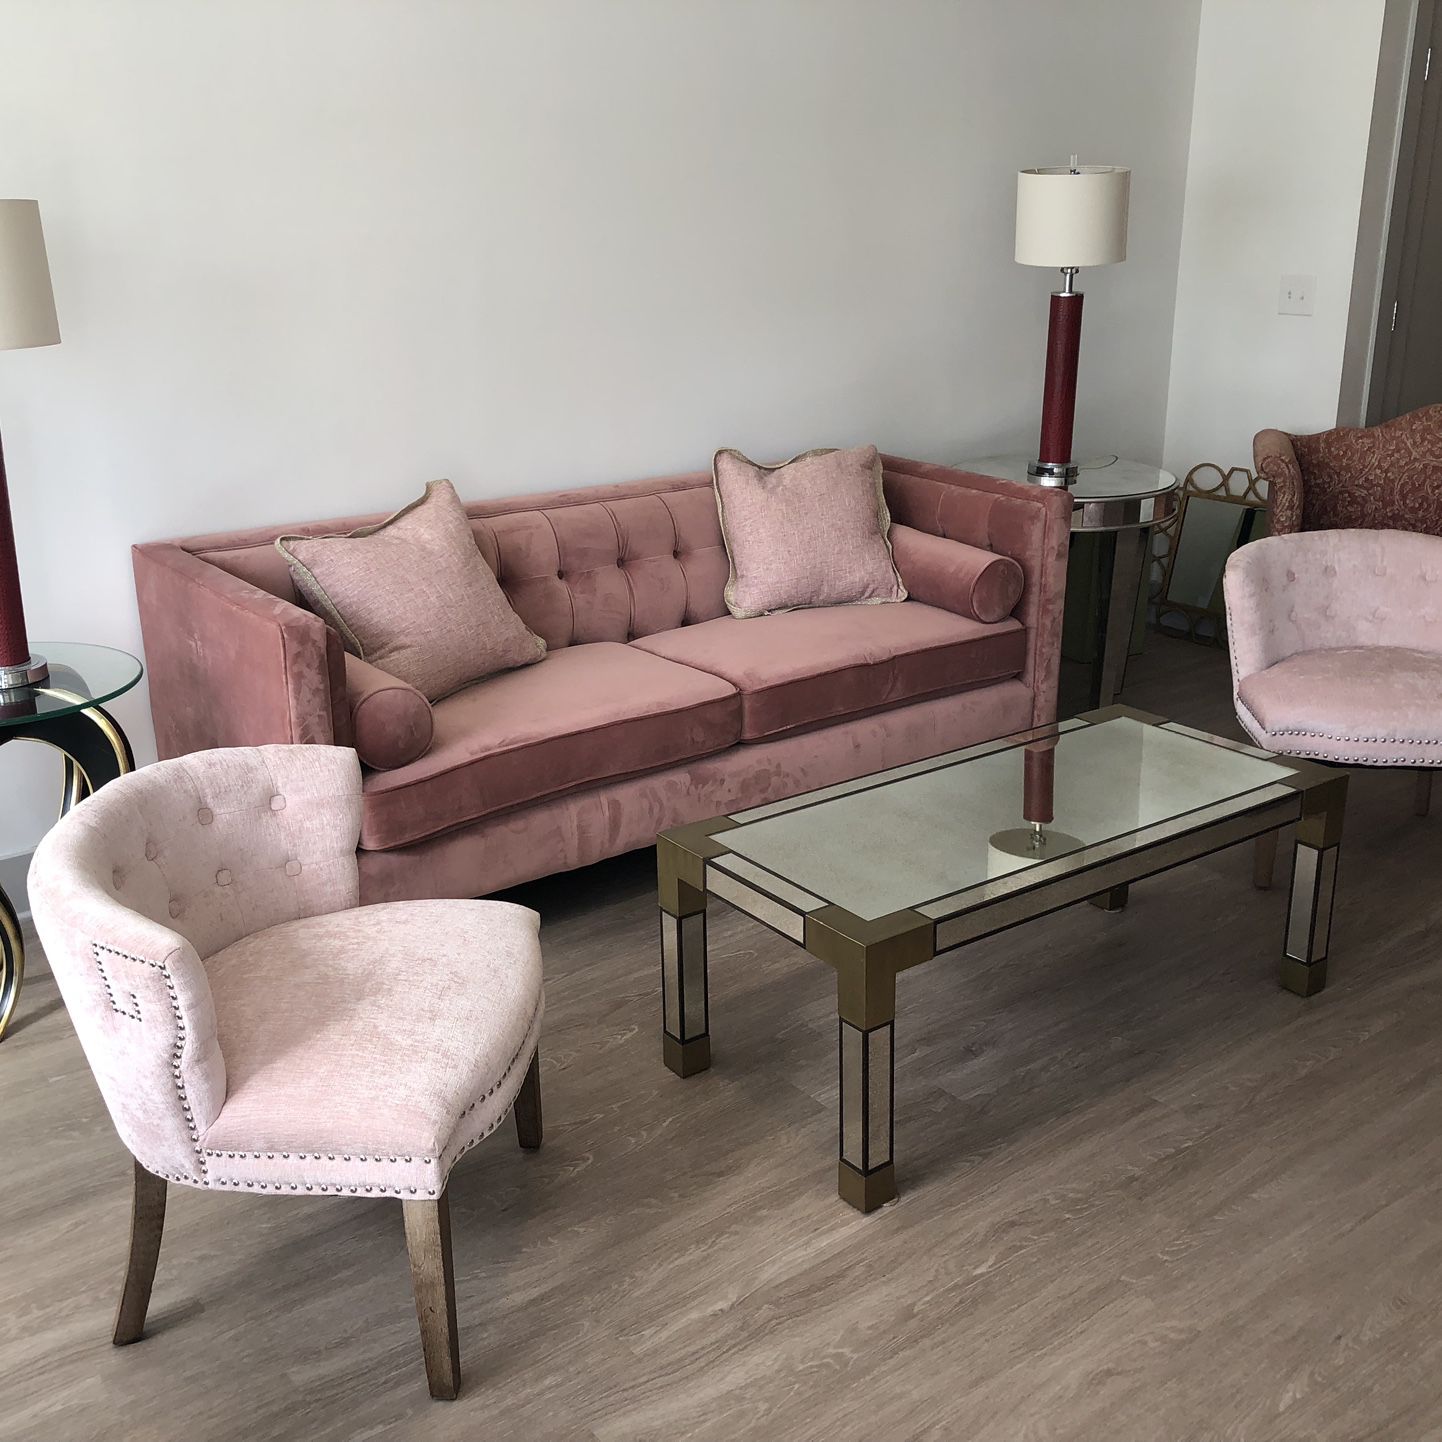 MUST SELL THIS WEEK!!! Pink Sofa ($200) & More Living Room/Dining Room